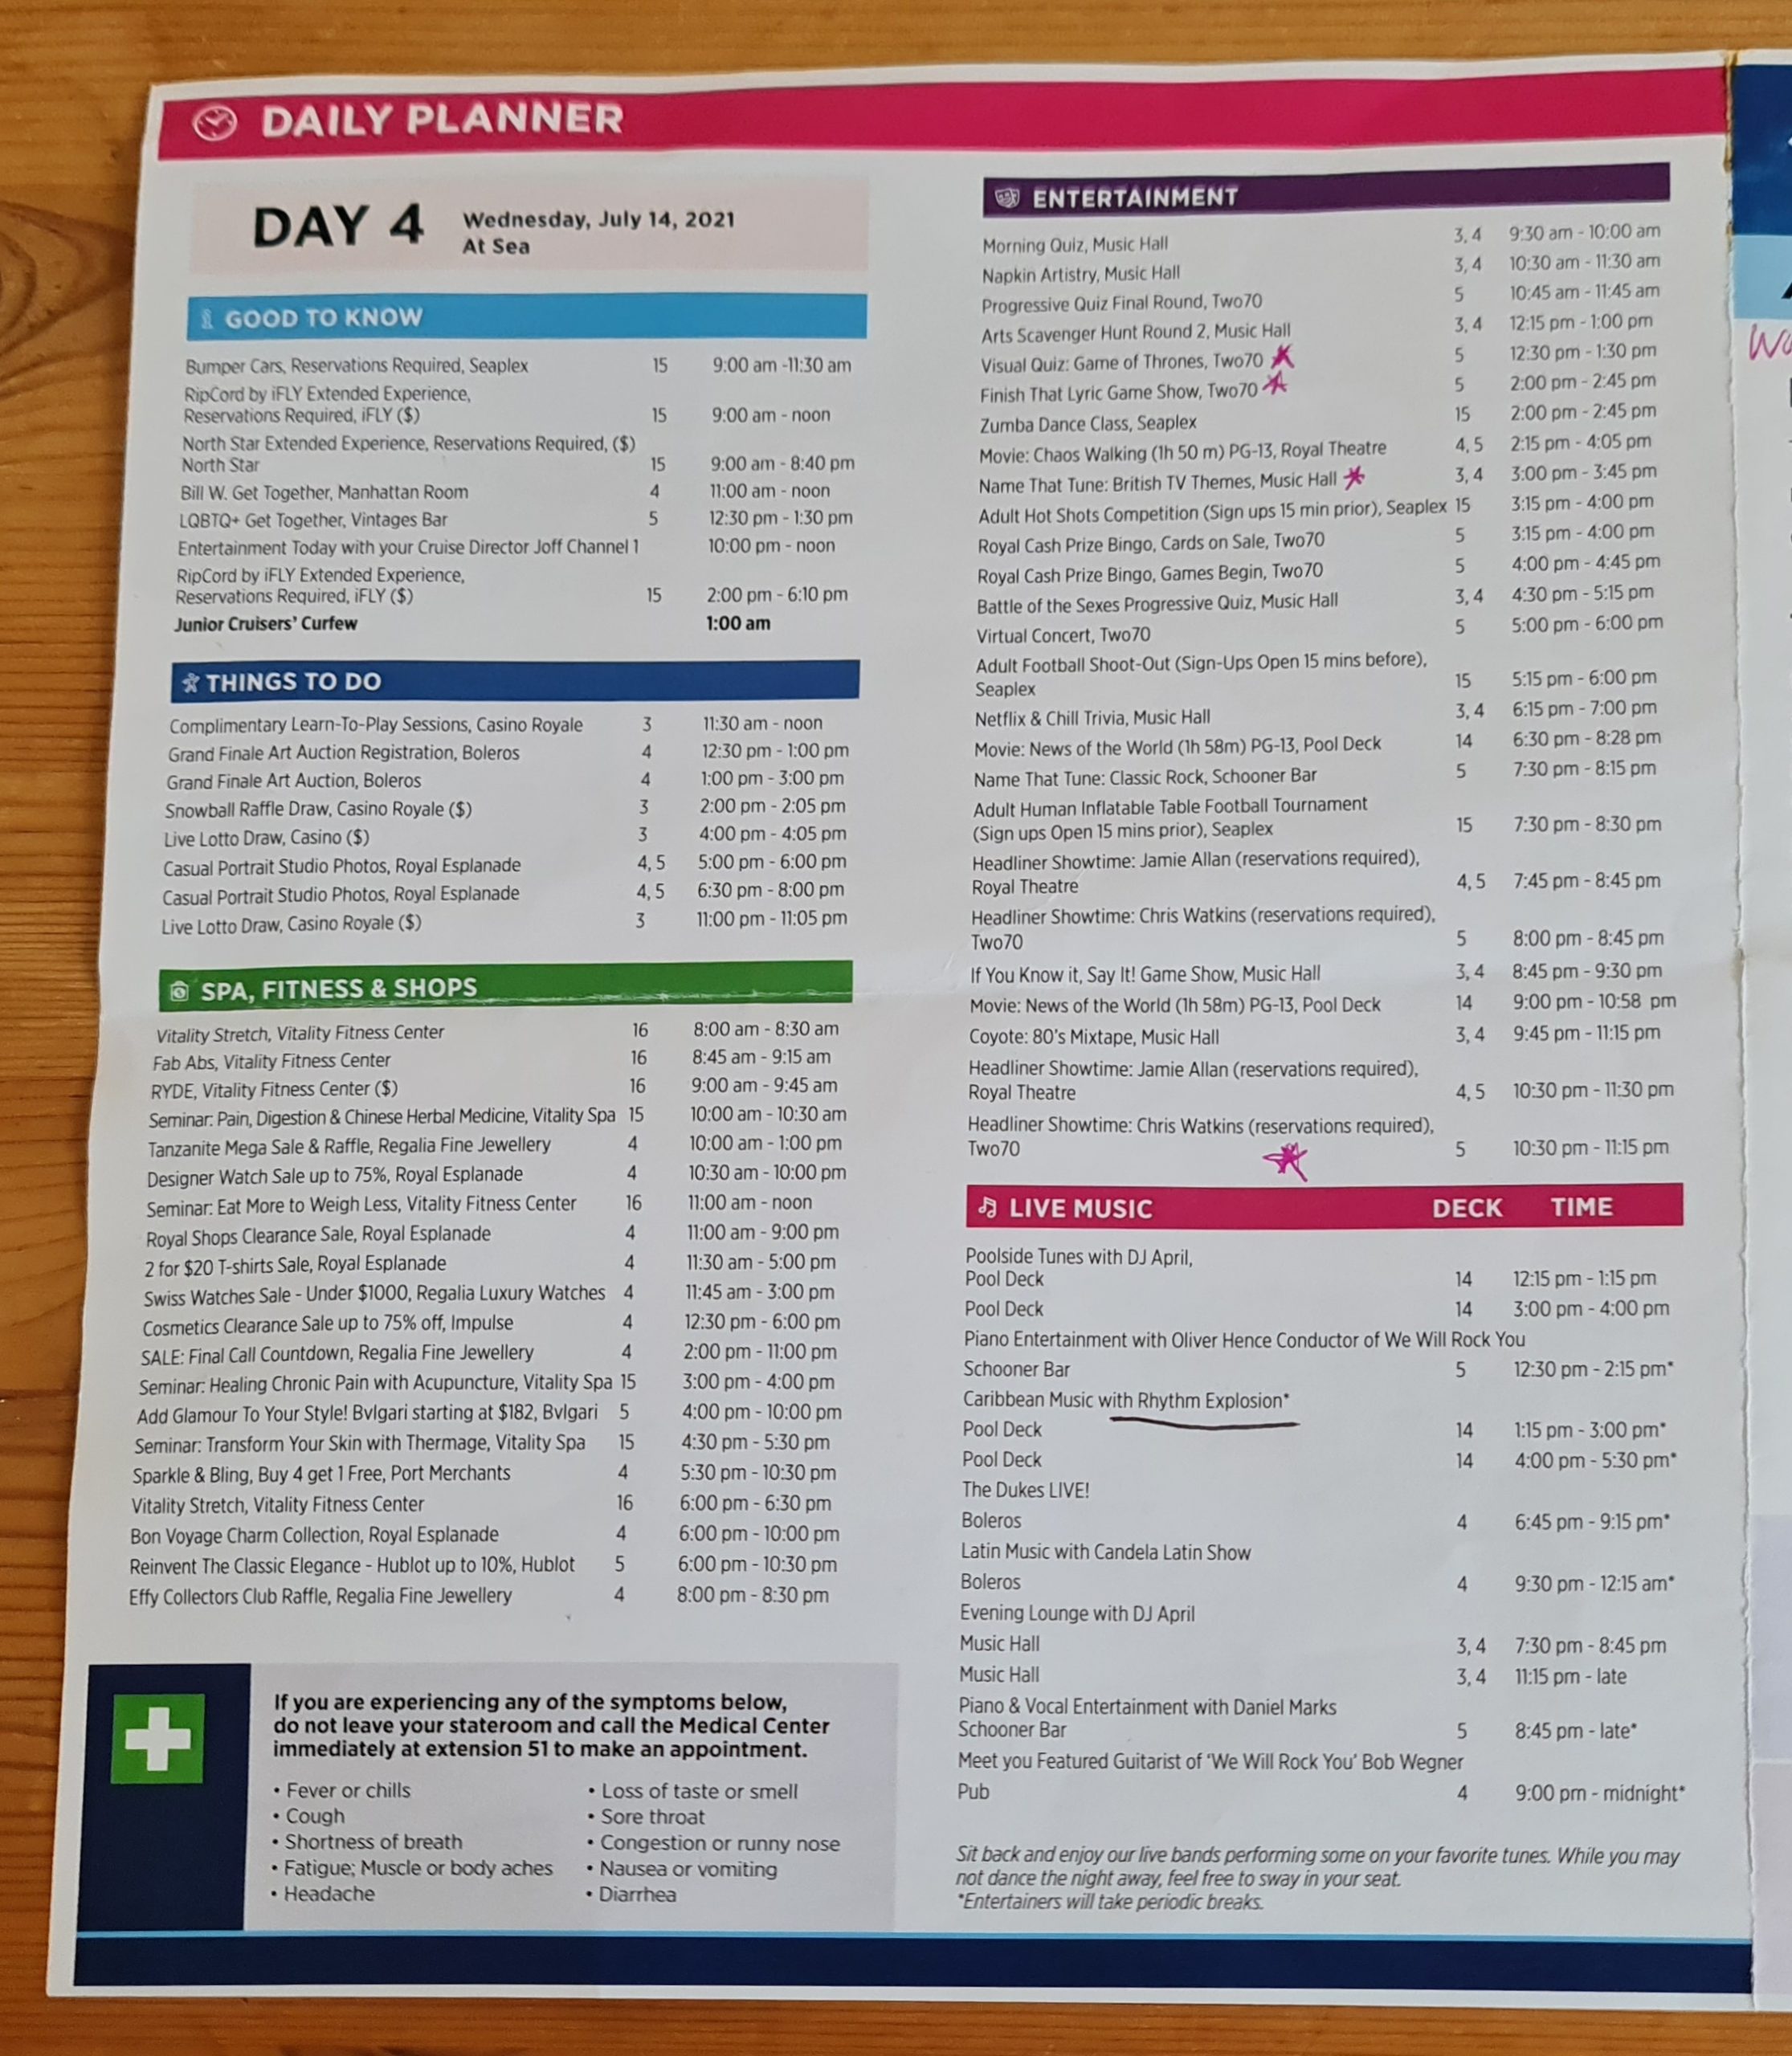 Seacation UK Royal Caribbean Anthem of the Seas Cruise Compass Daily Programs Daily planner